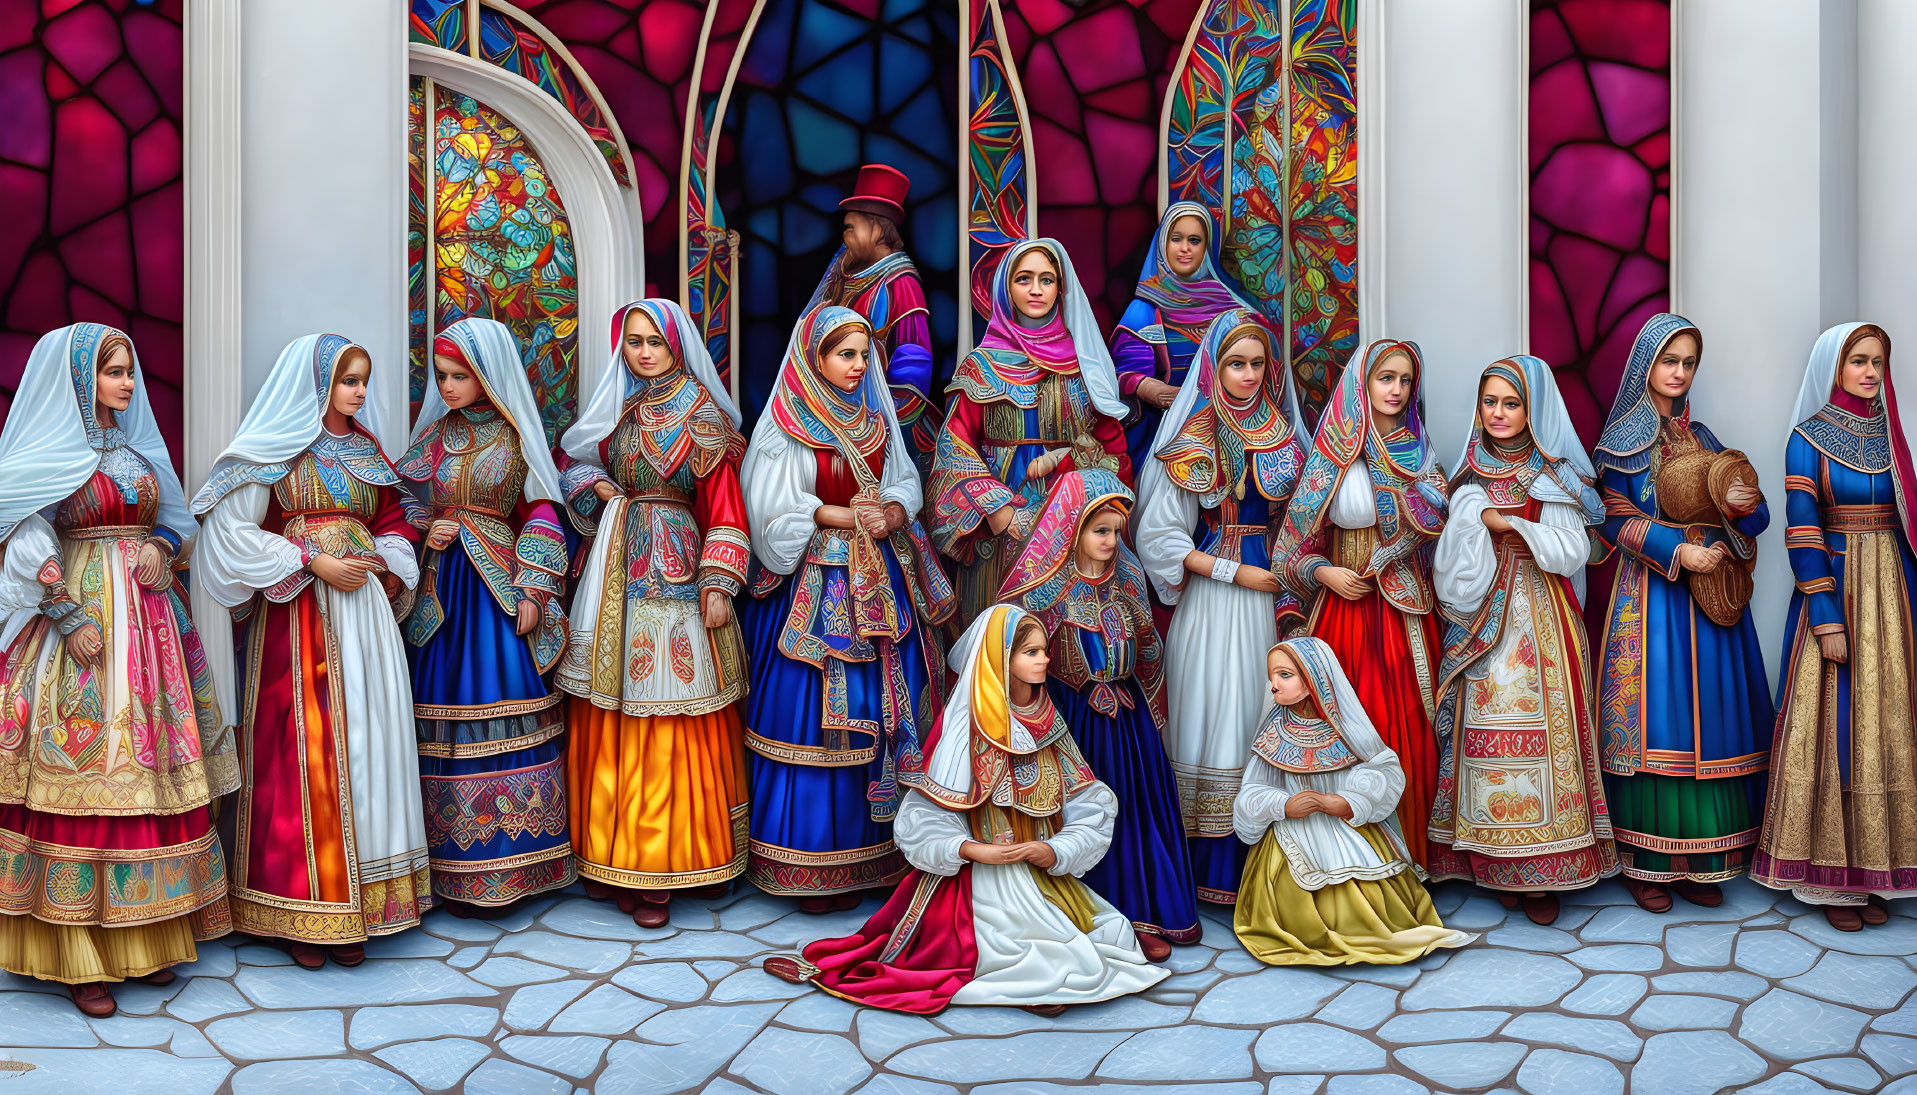 Traditional Eastern European figures in colorful attire against stained glass backdrop